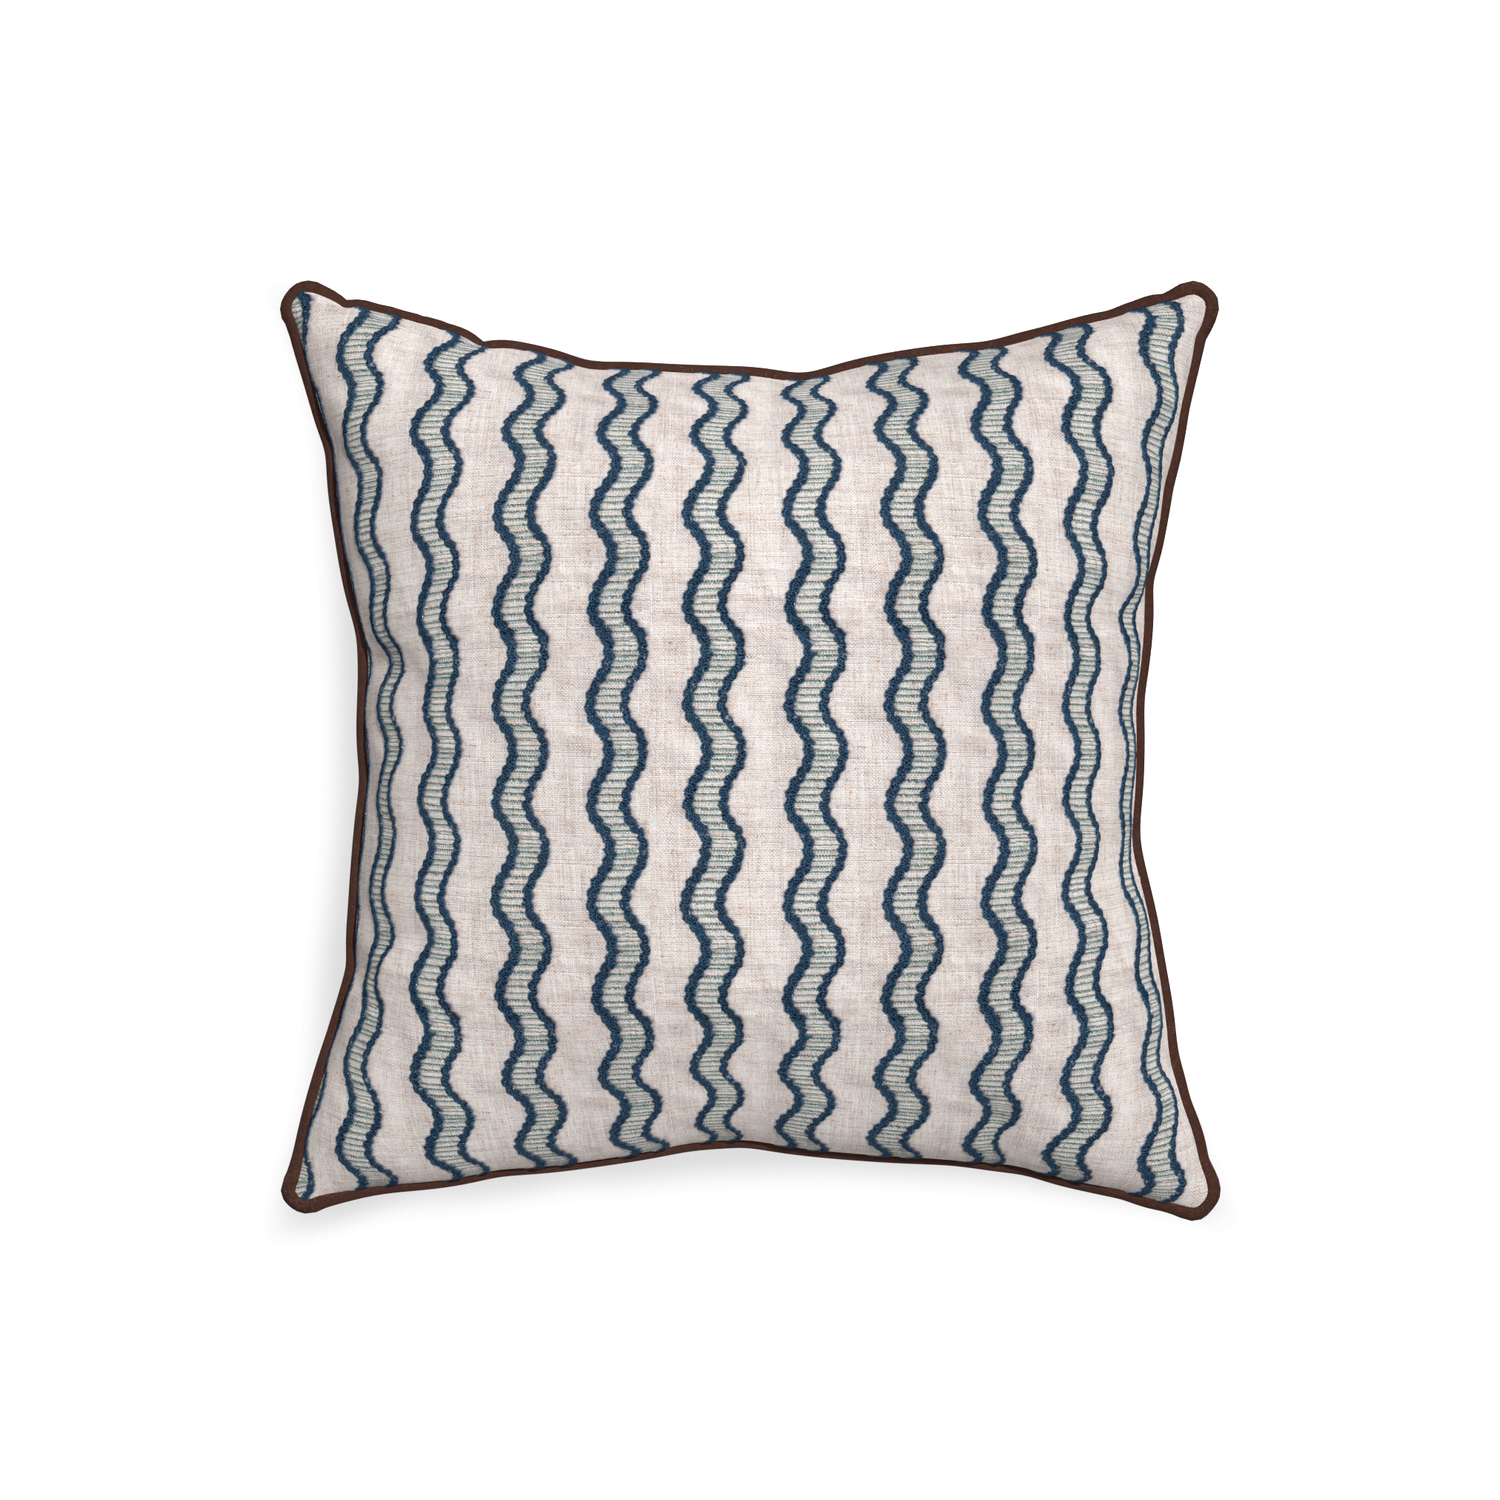 20-square beatrice custom embroidered wavepillow with w piping on white background